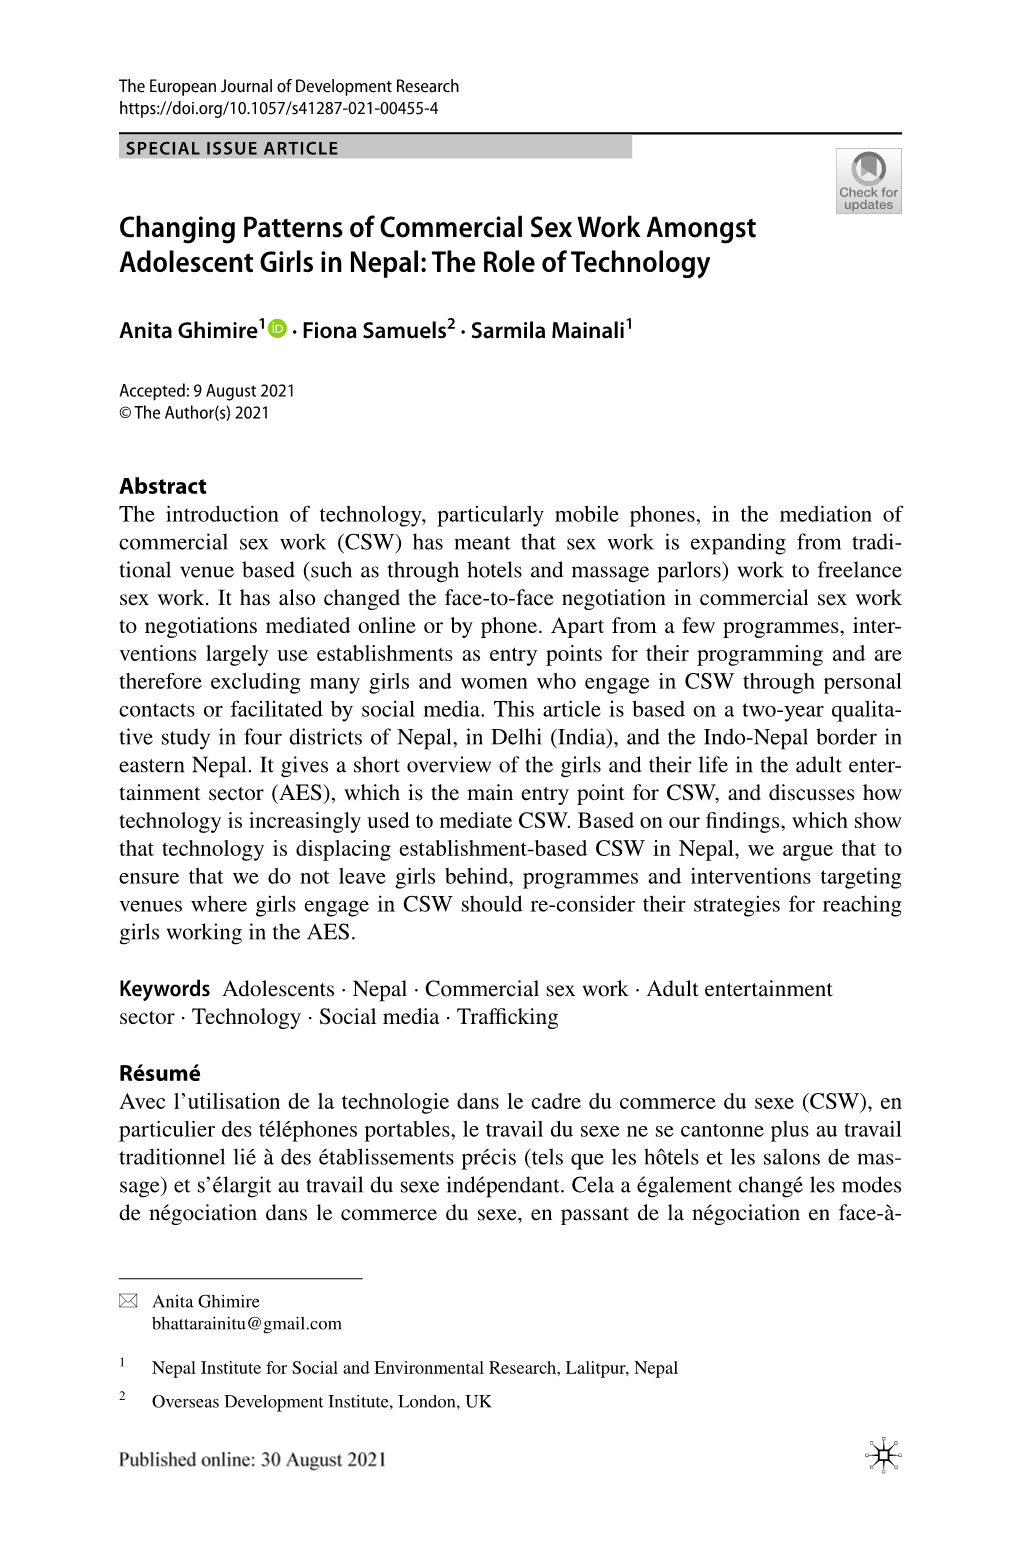 Changing Patterns of Commercial Sex Work Amongst Adolescent Girls in Nepal: the Role of Technology